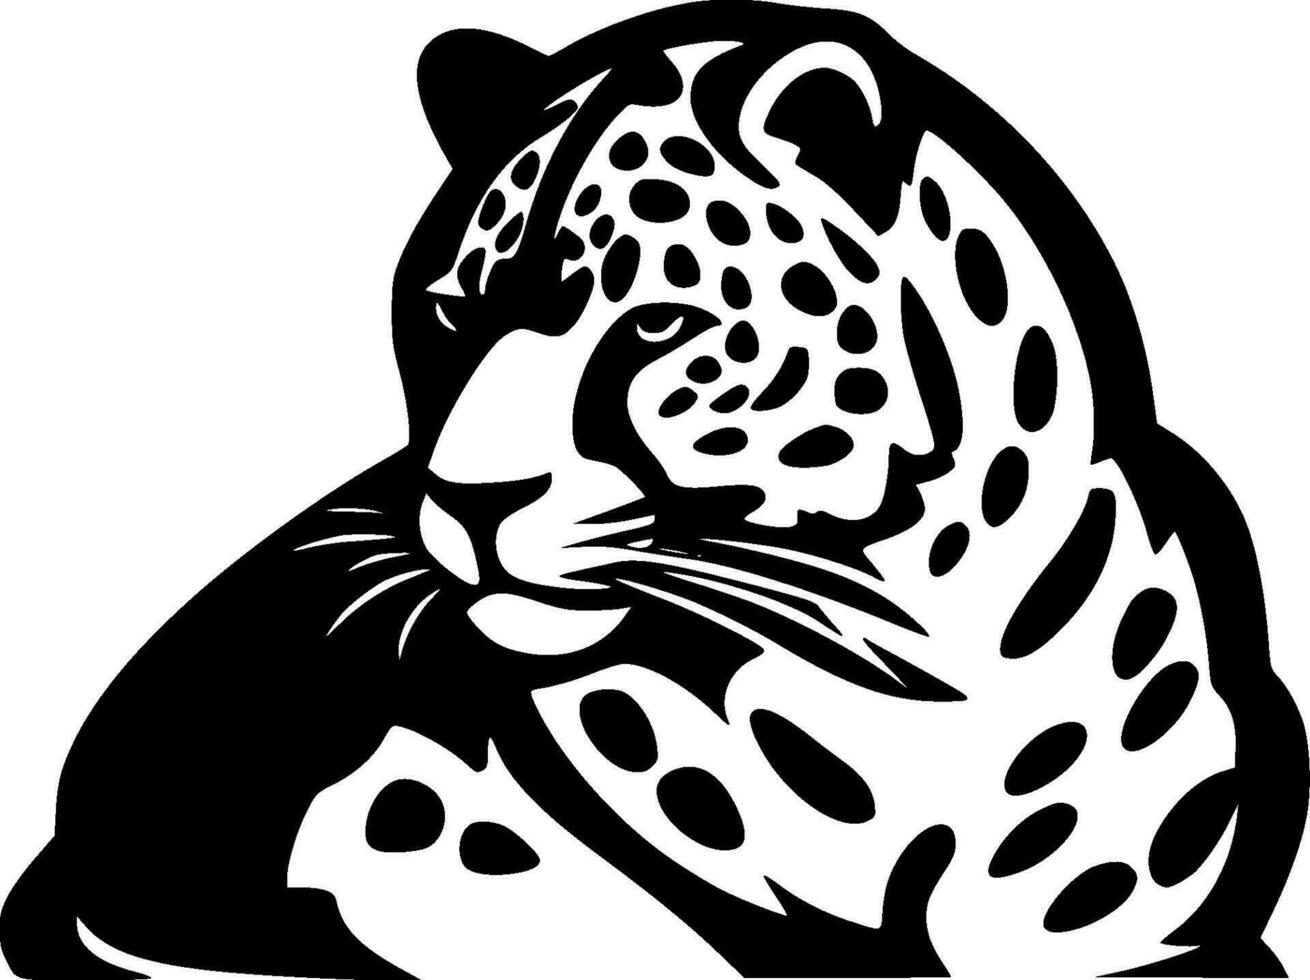 Leopard - Black and White Isolated Icon - Vector illustration